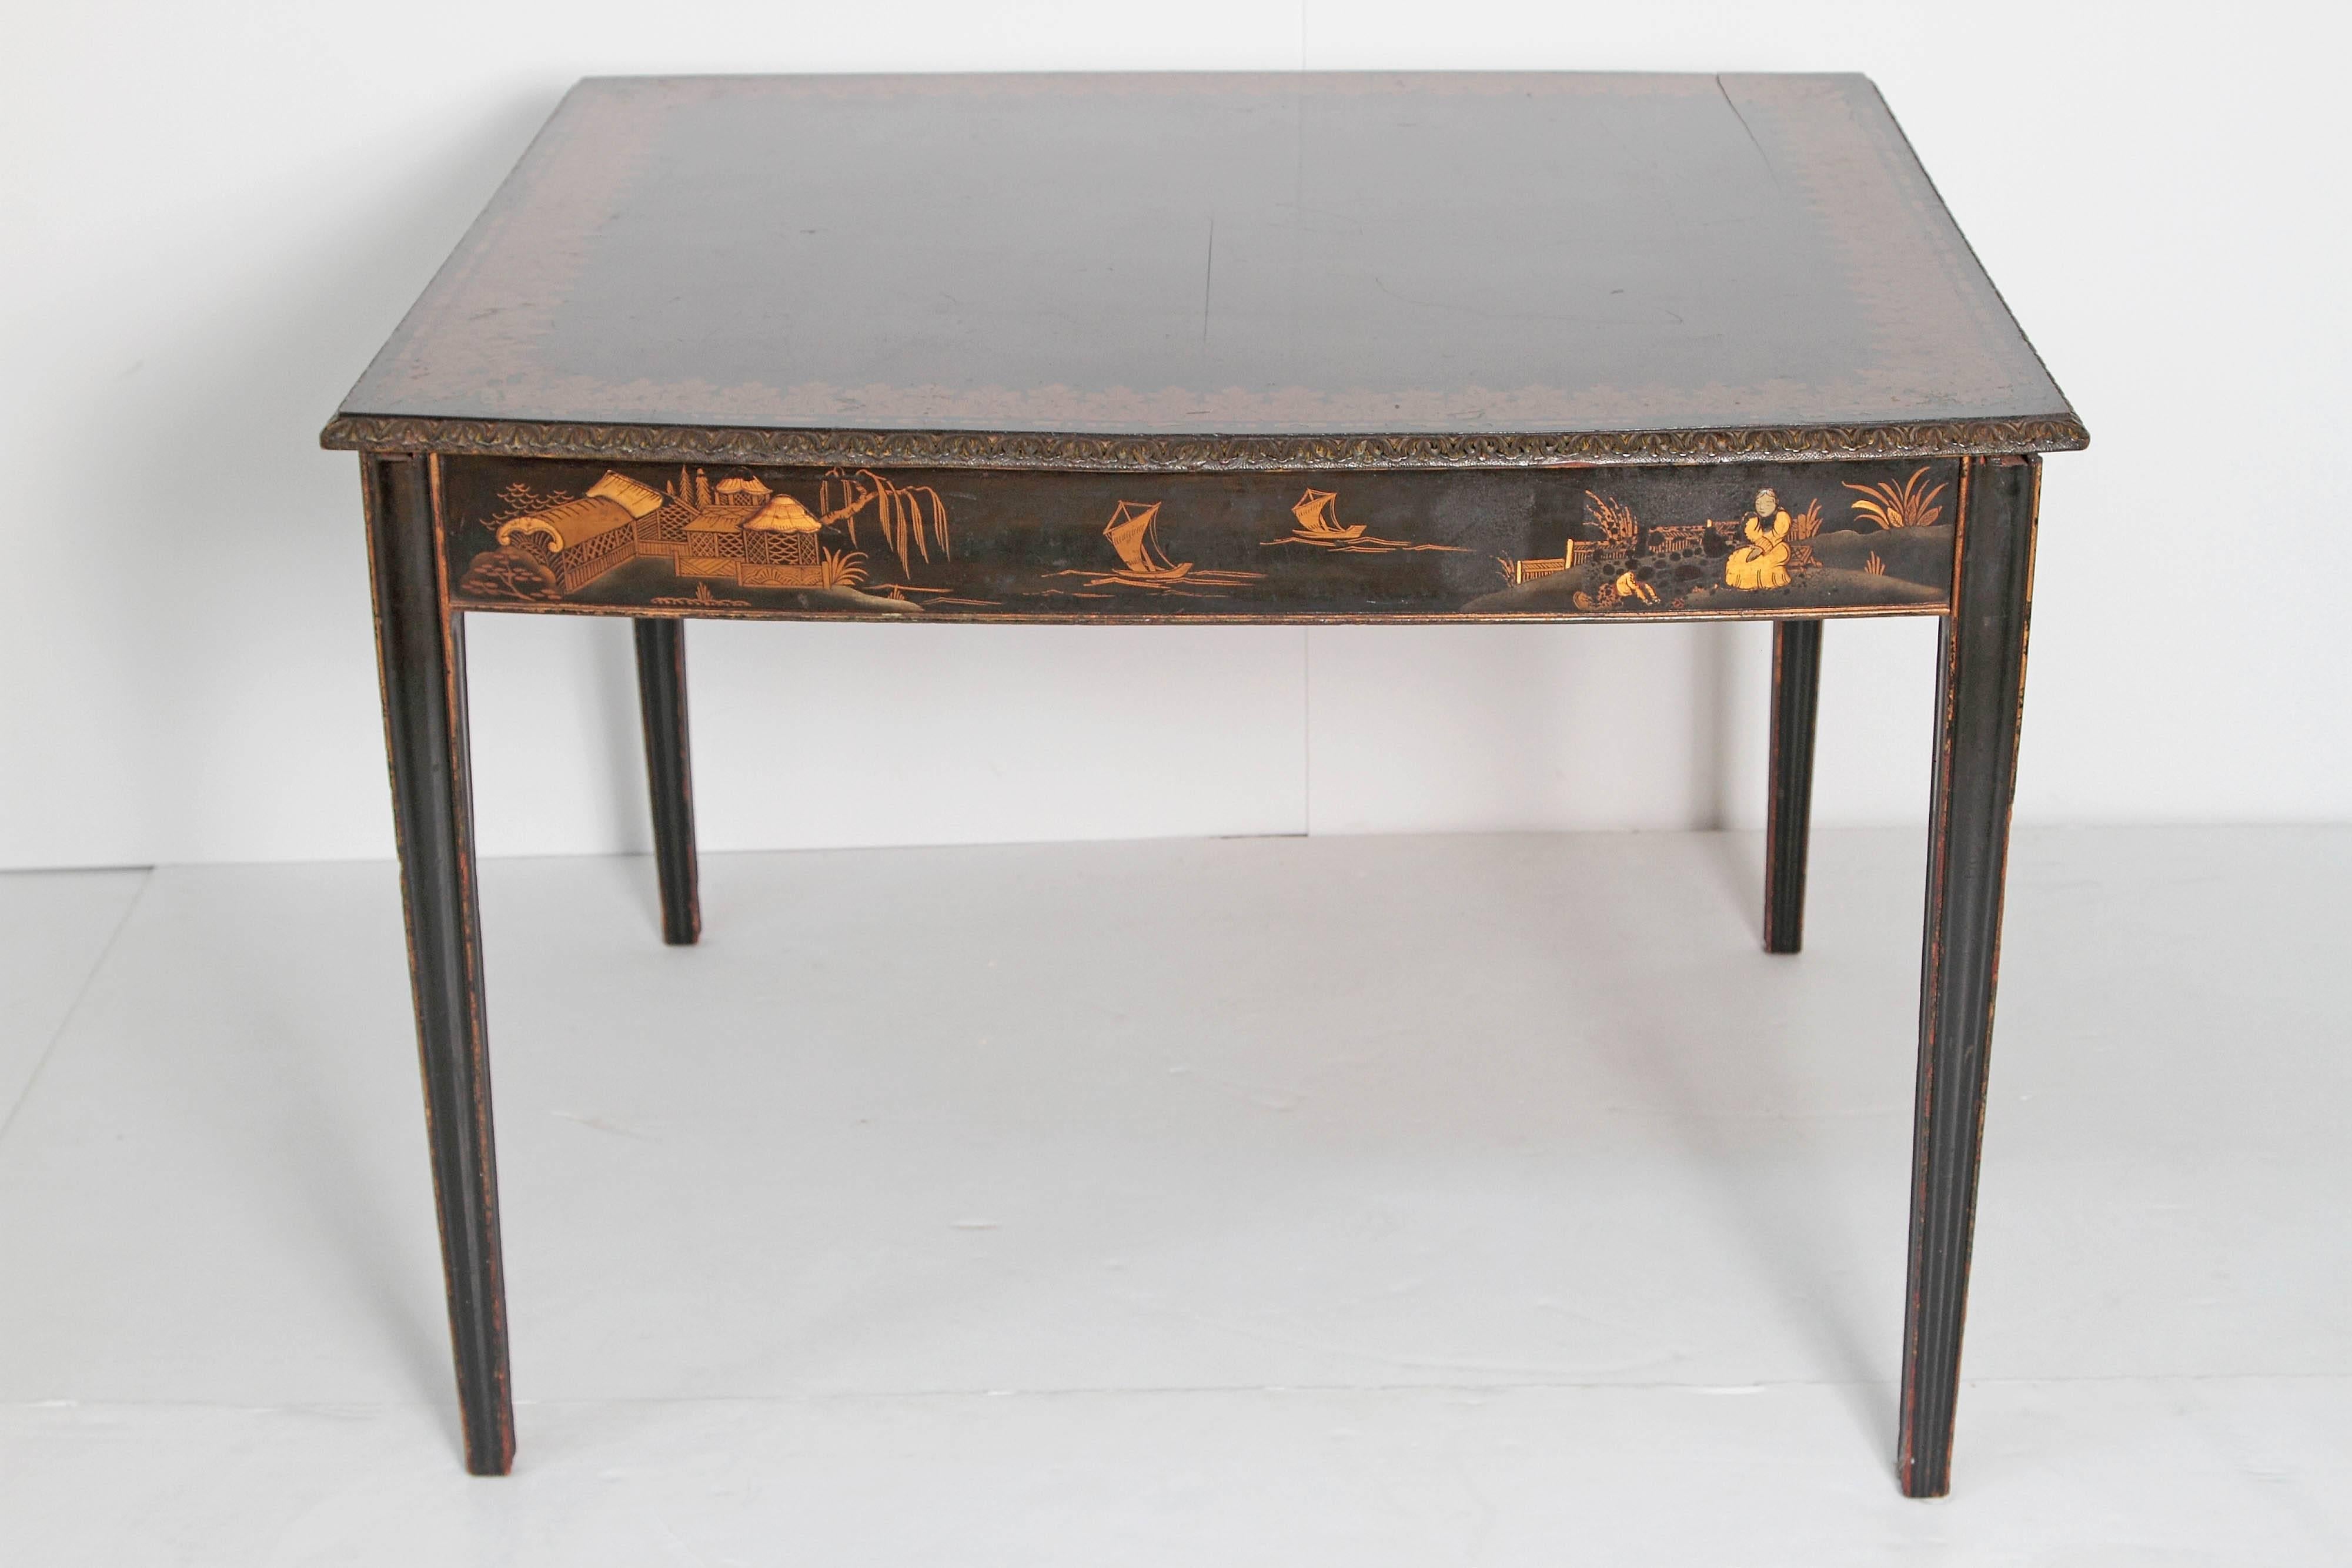 A square black lacquer chinoiserie card / games table with slightly bowed sides. Top with carved edge and overall painted gold acanthus leaf border. Each apron has gold painted scenes of daily life including house, people, boats and birds. Tapered